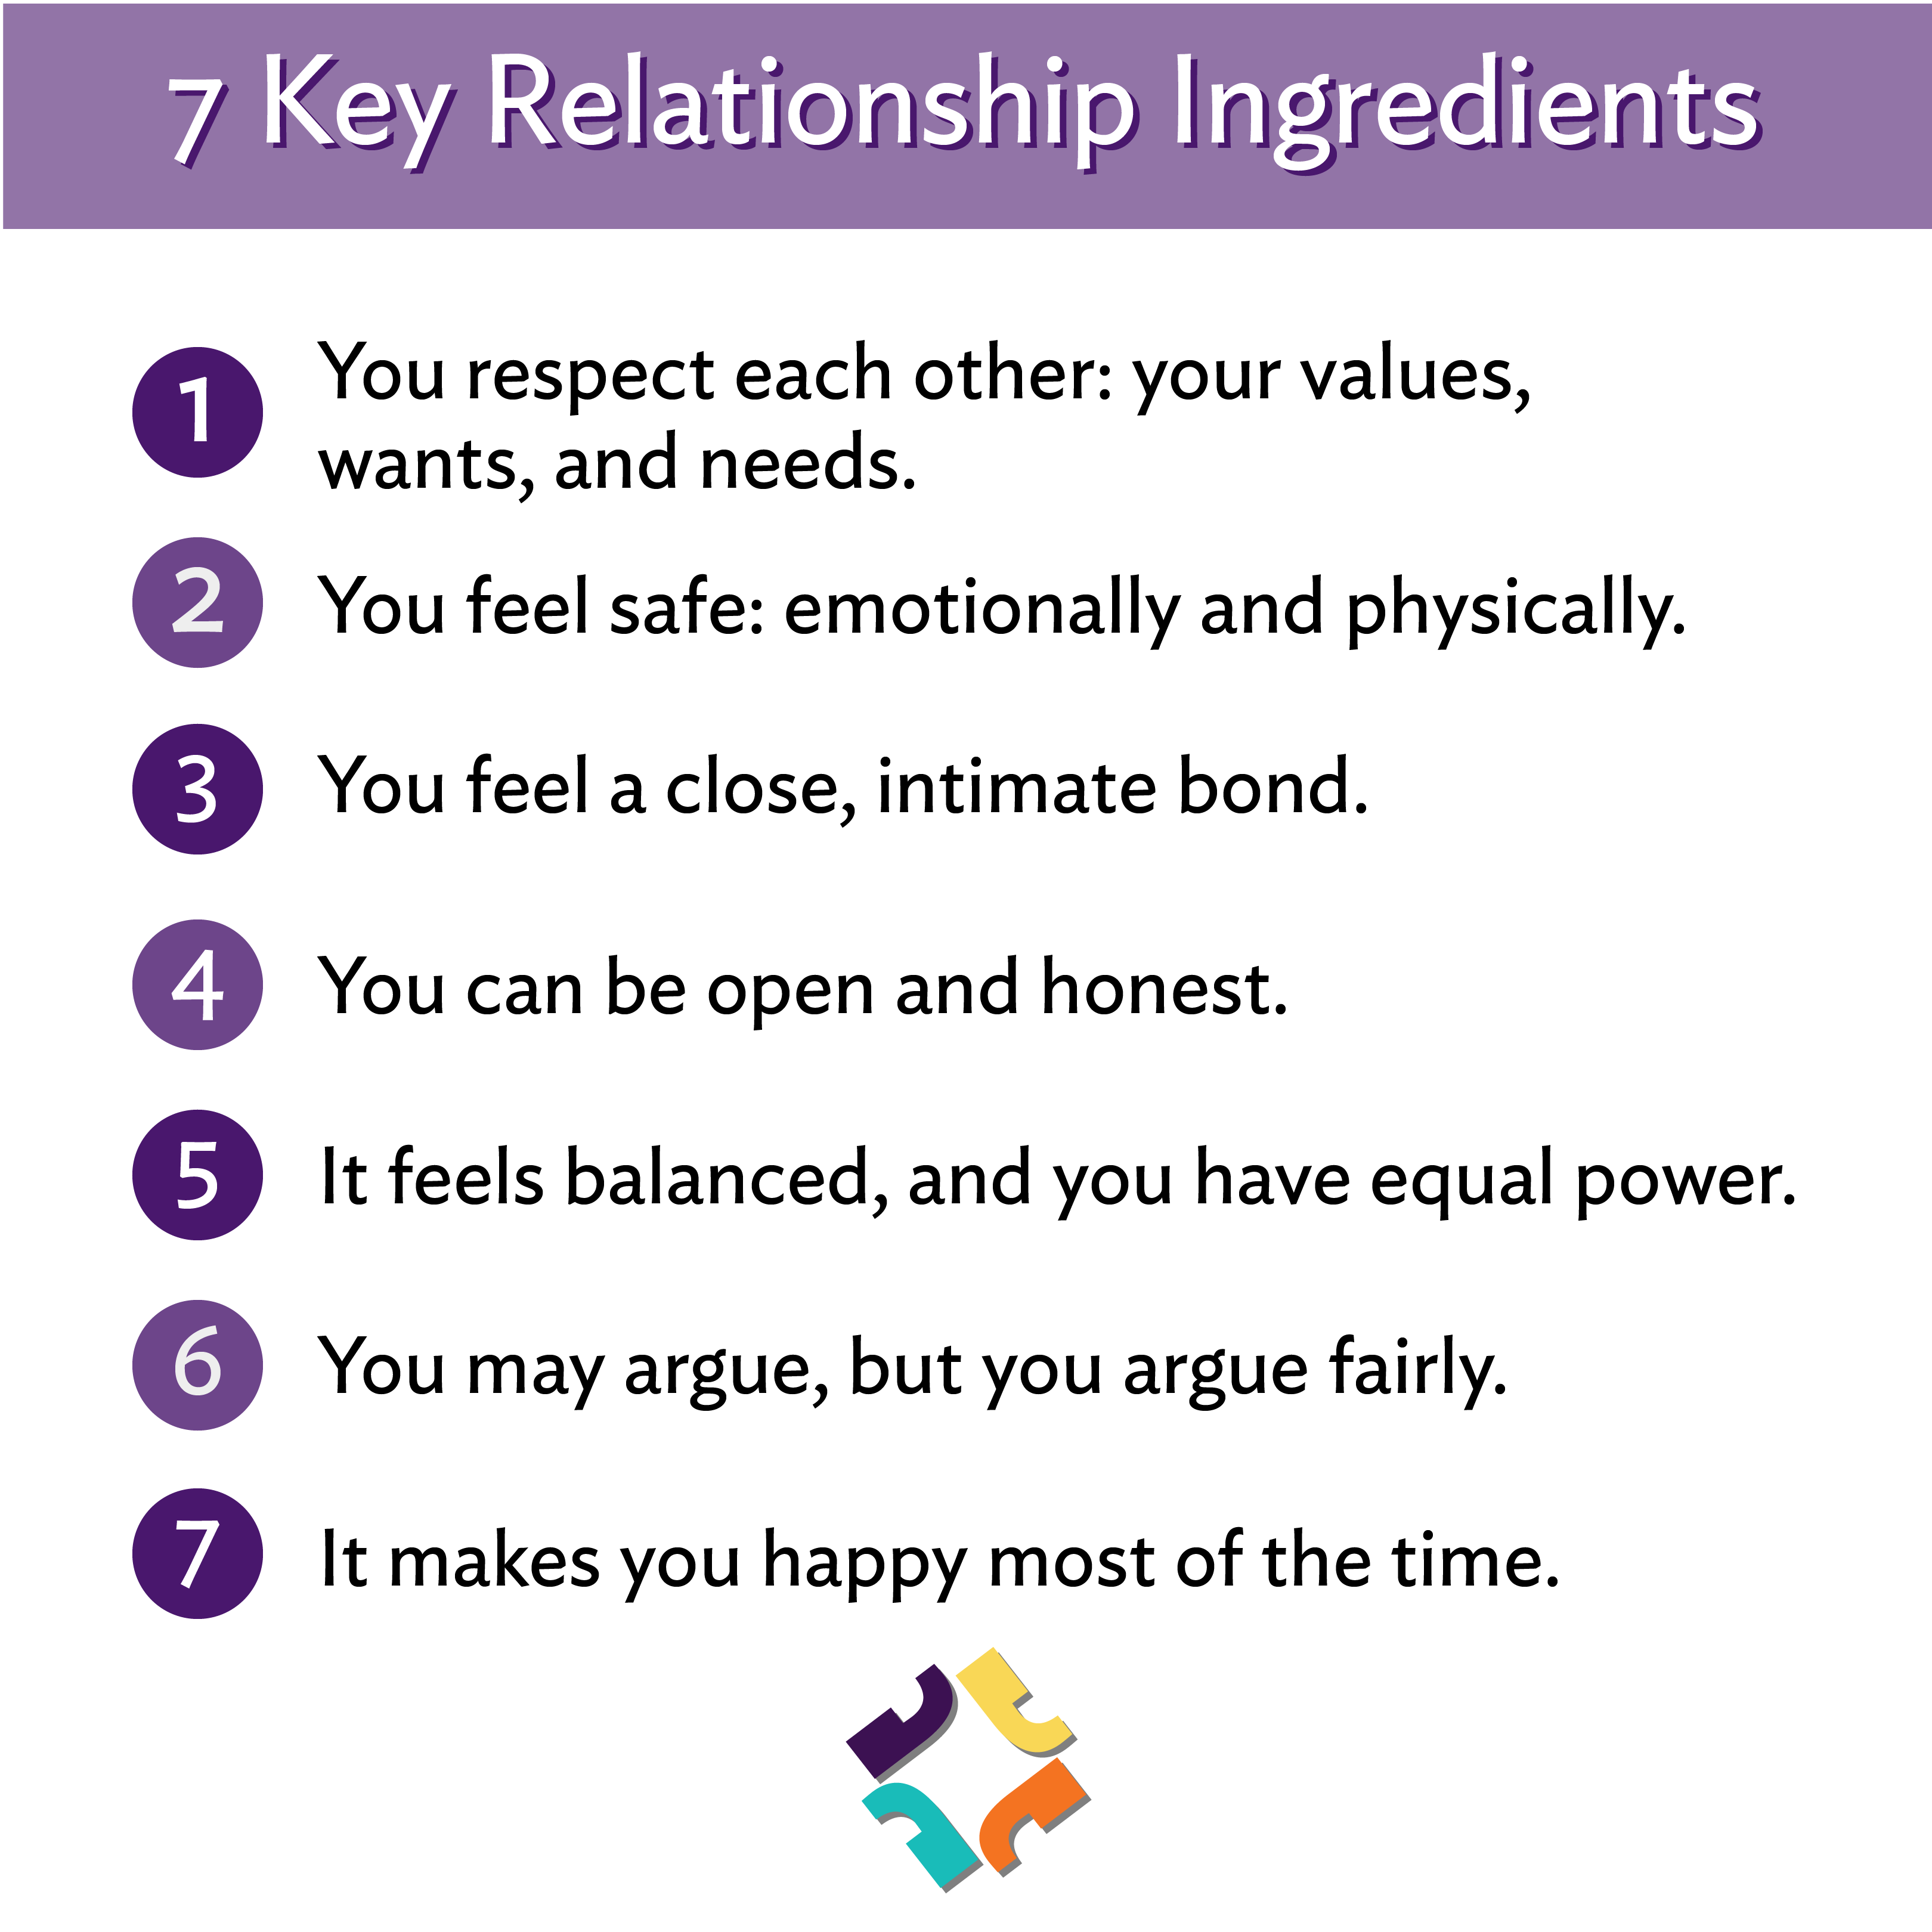 Healthy Relationship 2